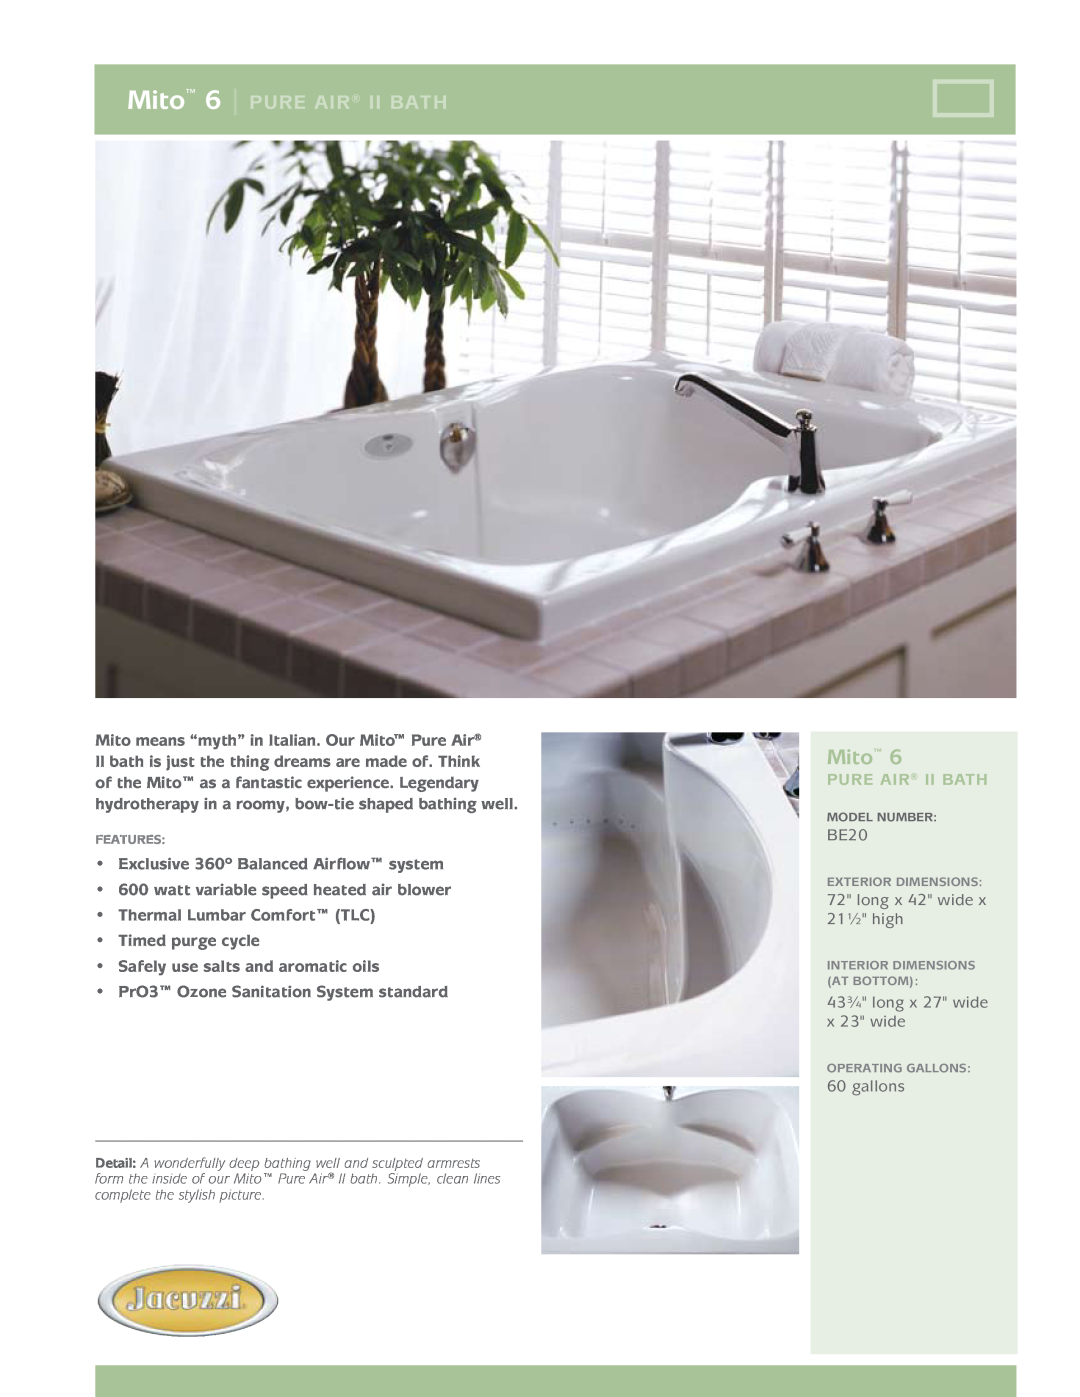 Jacuzzi BE20 dimensions long x 42 wide x 21½ high, 43¾ long x 27 wide x 23 wide, gallons, Mito 6 pure air ii Bath 